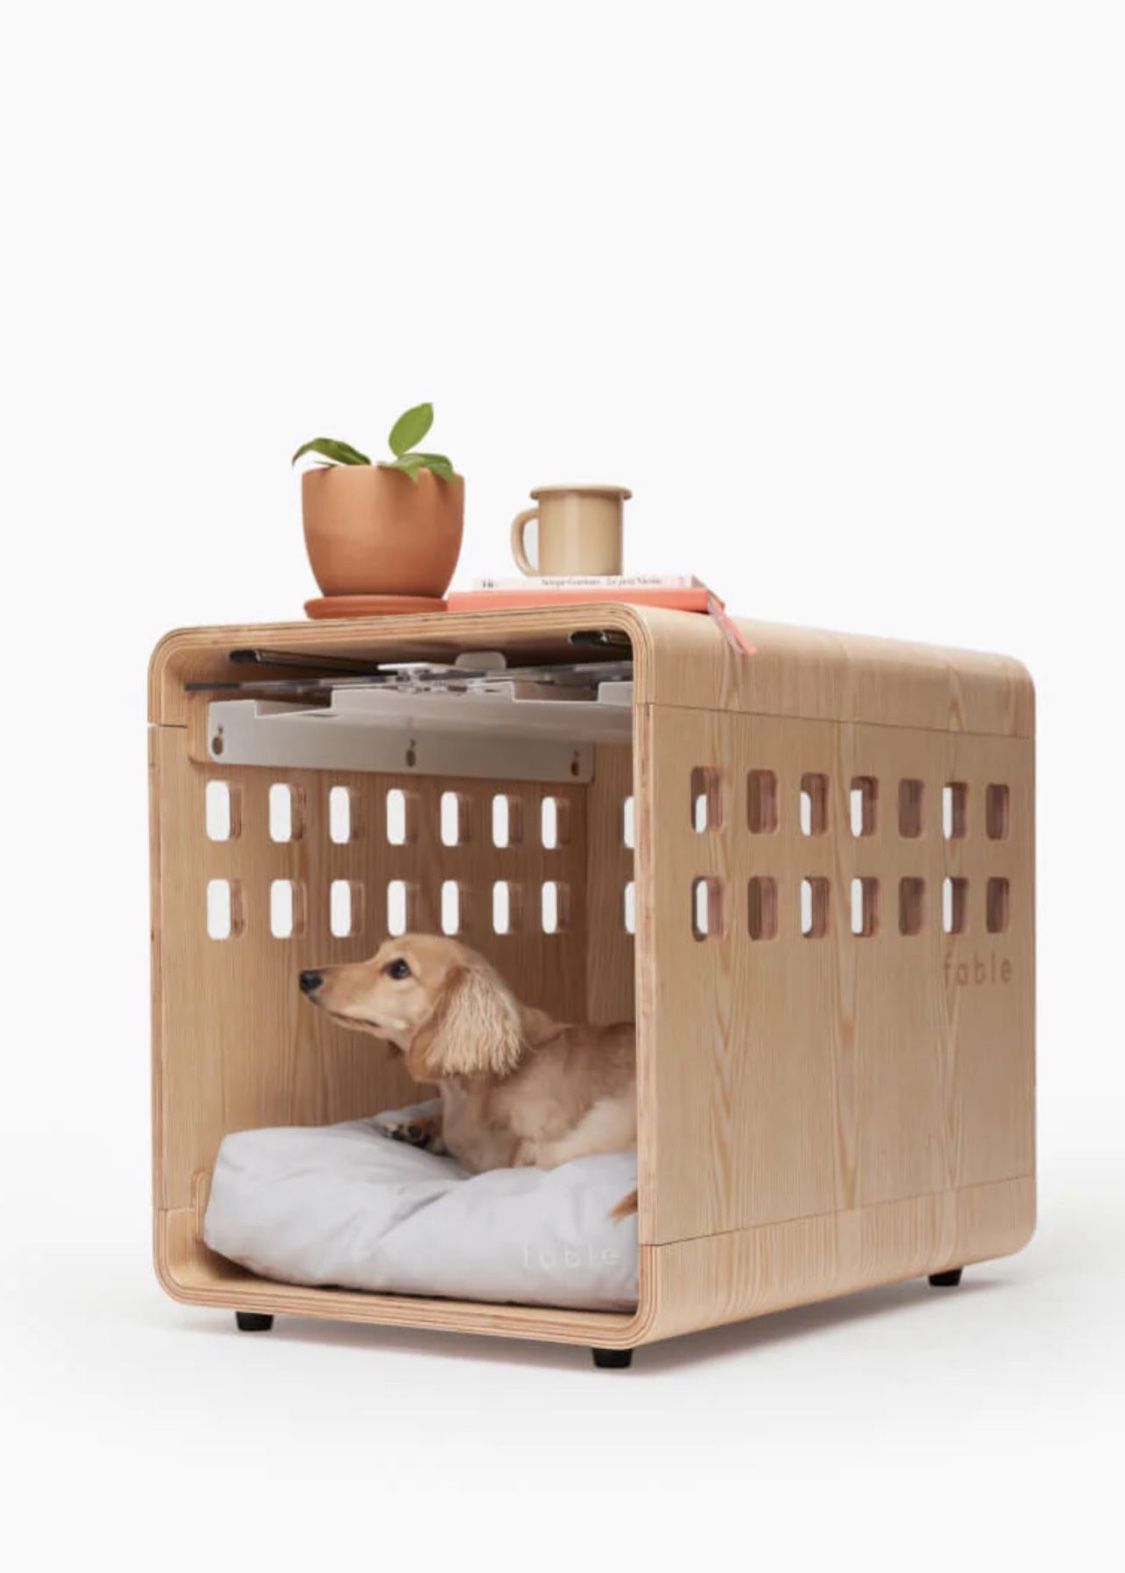 FABLE Premium Wood Dog Crate Size S/M